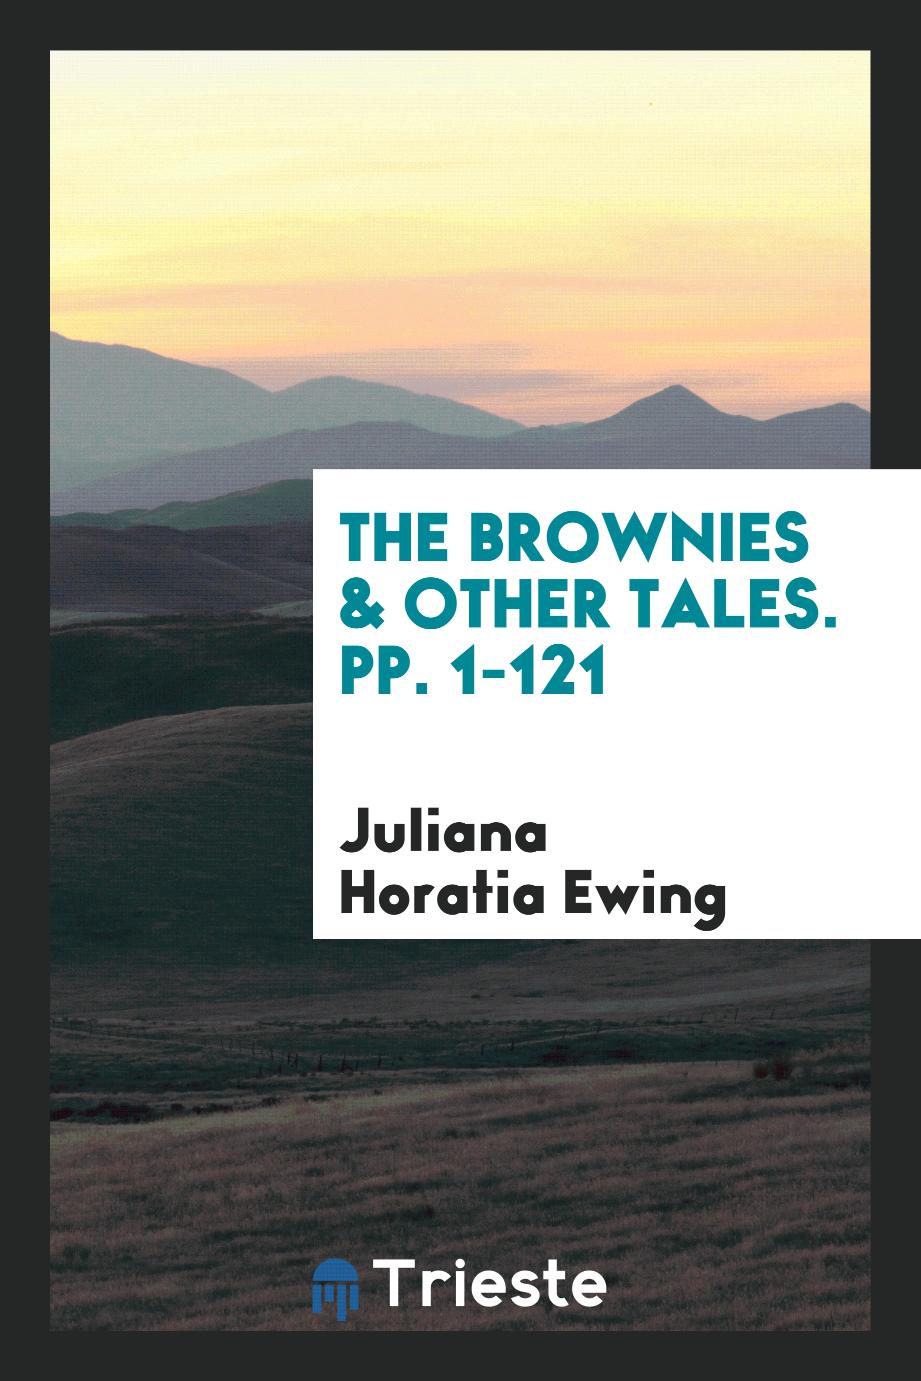 The Brownies & Other Tales. Pp. 1-121